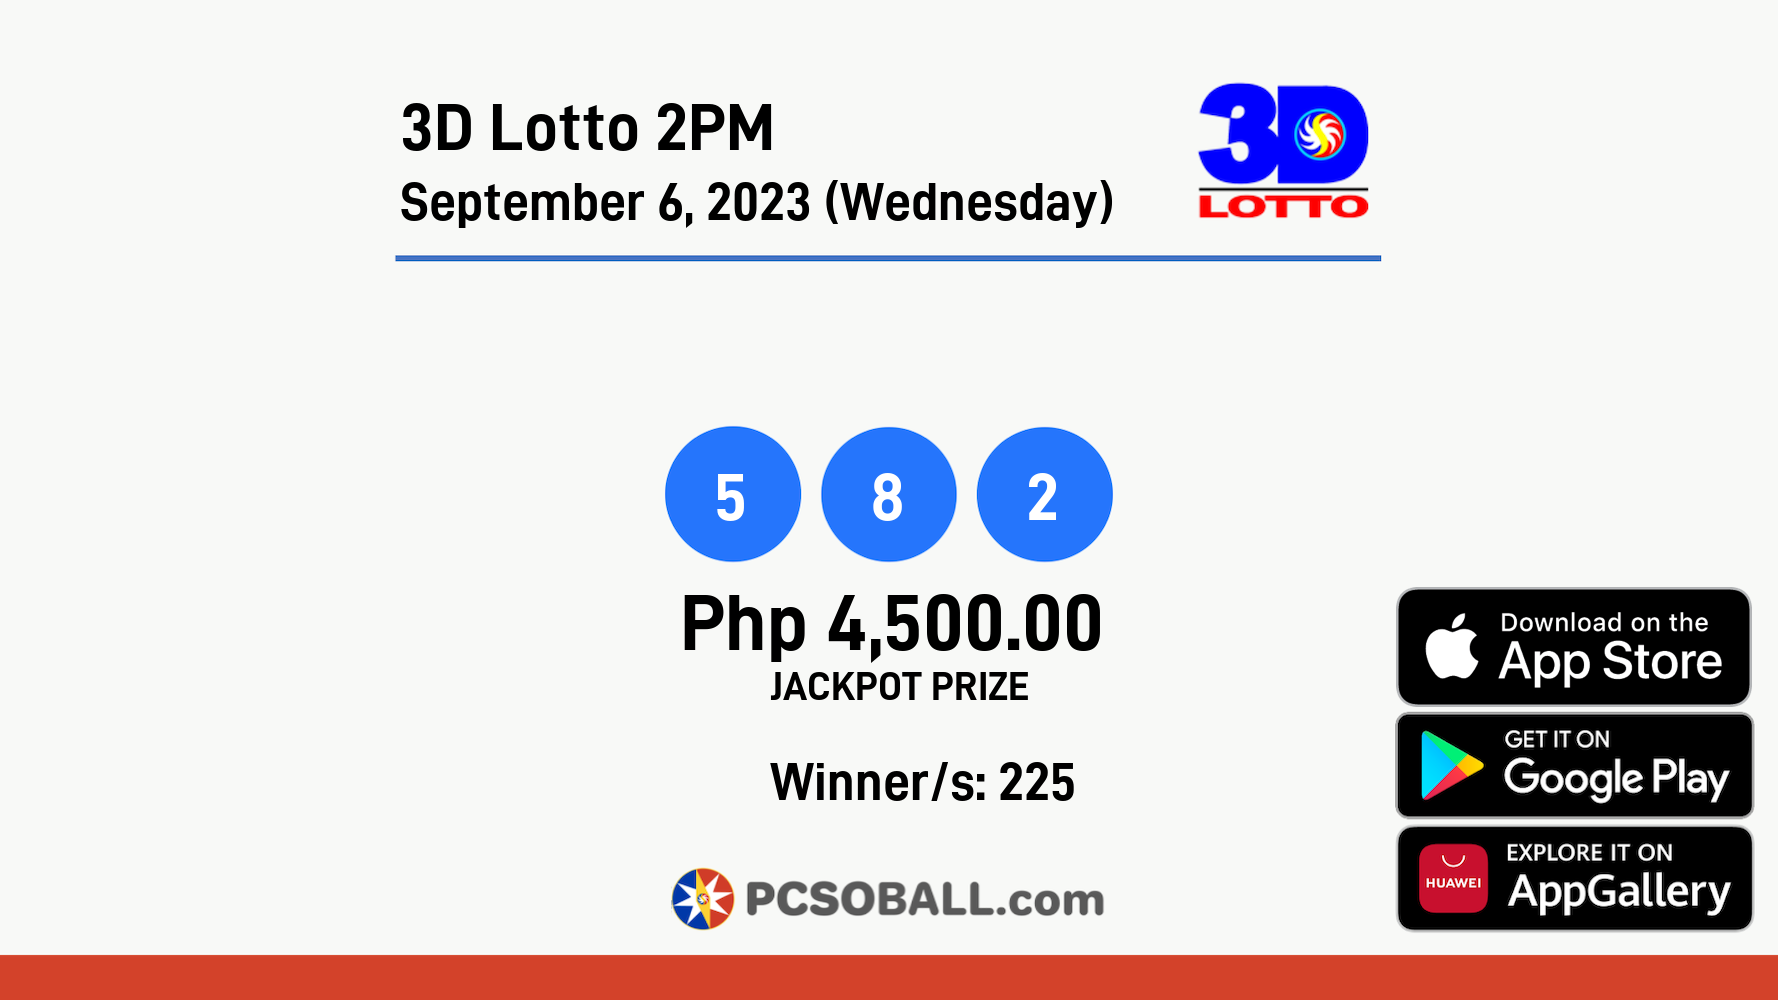 3D Lotto 2PM September 6, 2023 (Wednesday) Result